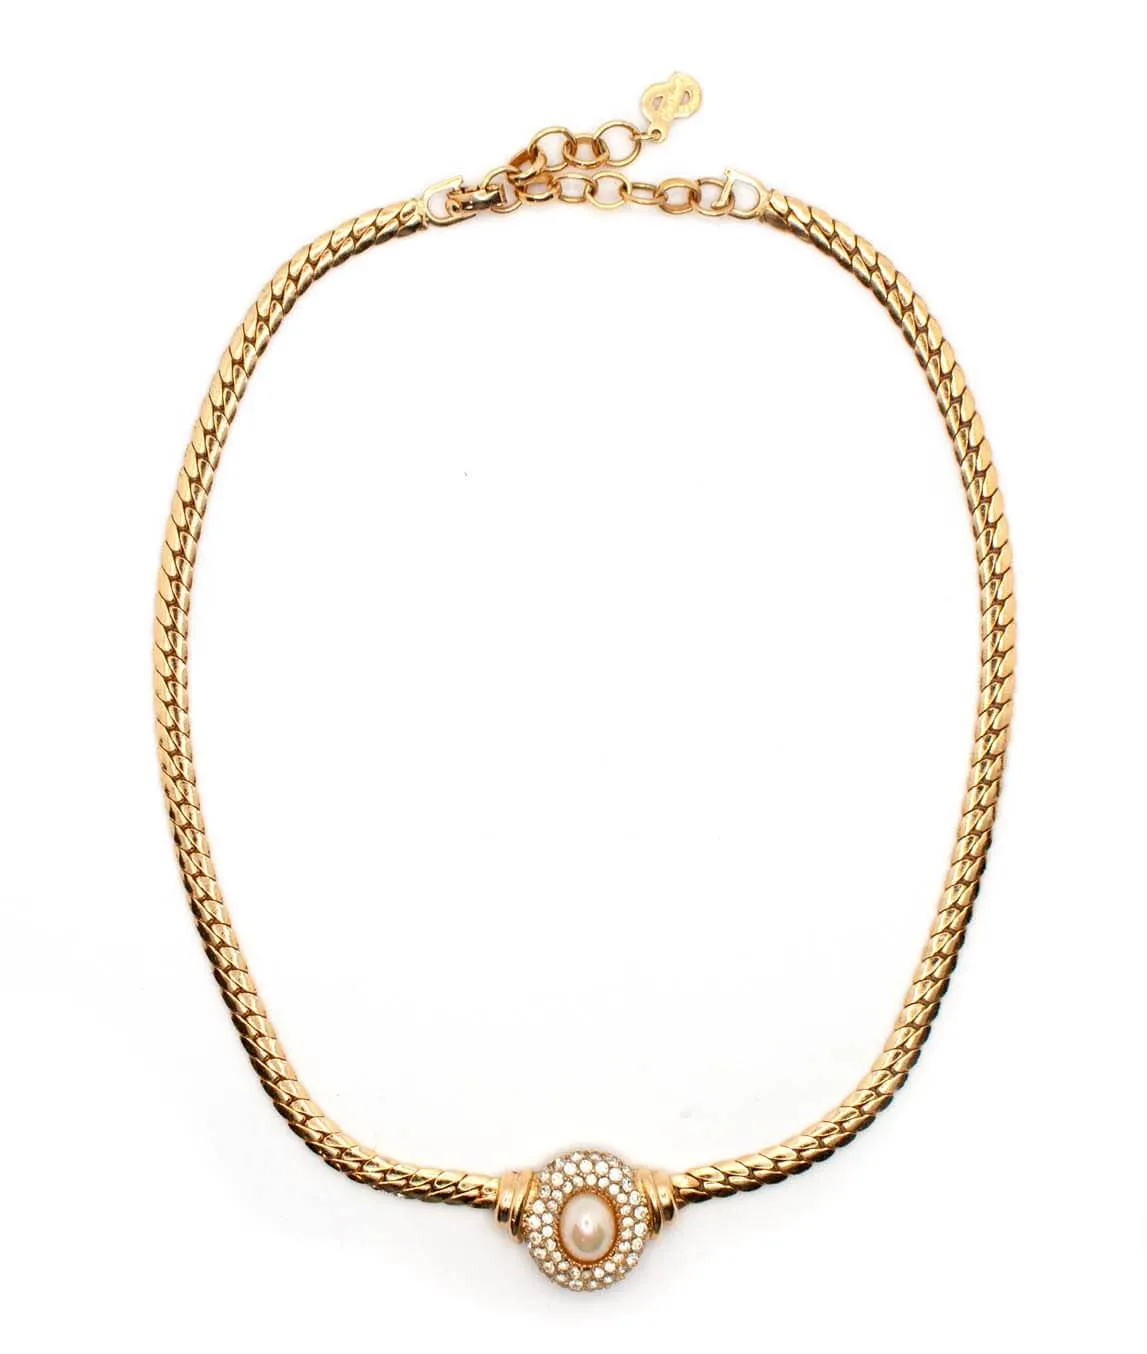 Christian Dior vintage flat chain with extension chain